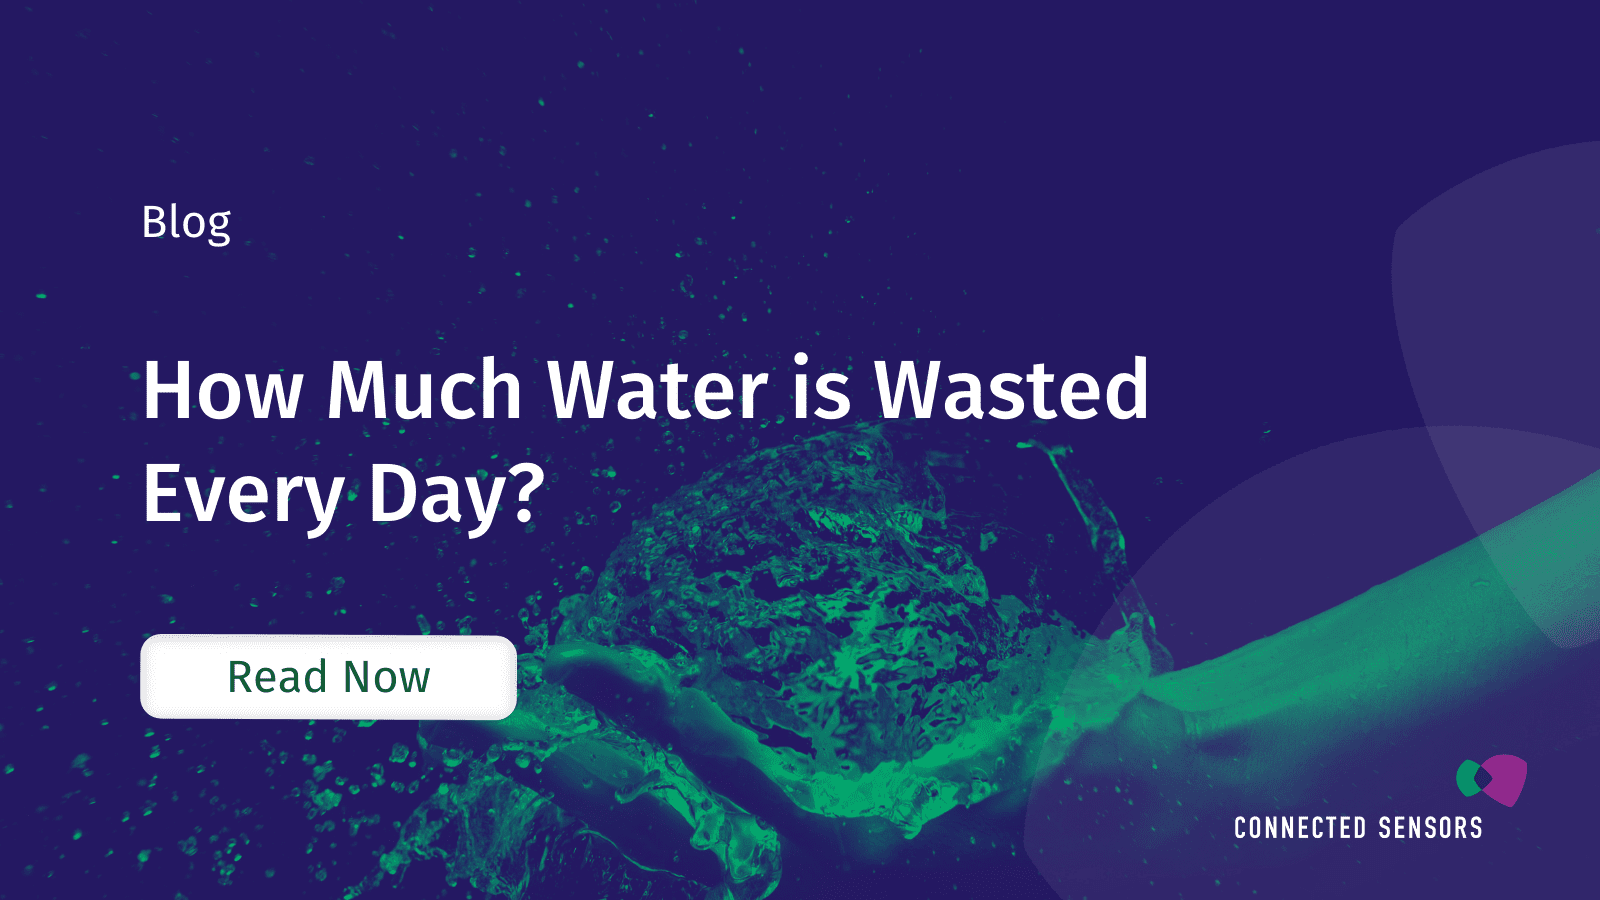 How Much Water is Wasted Every Day?